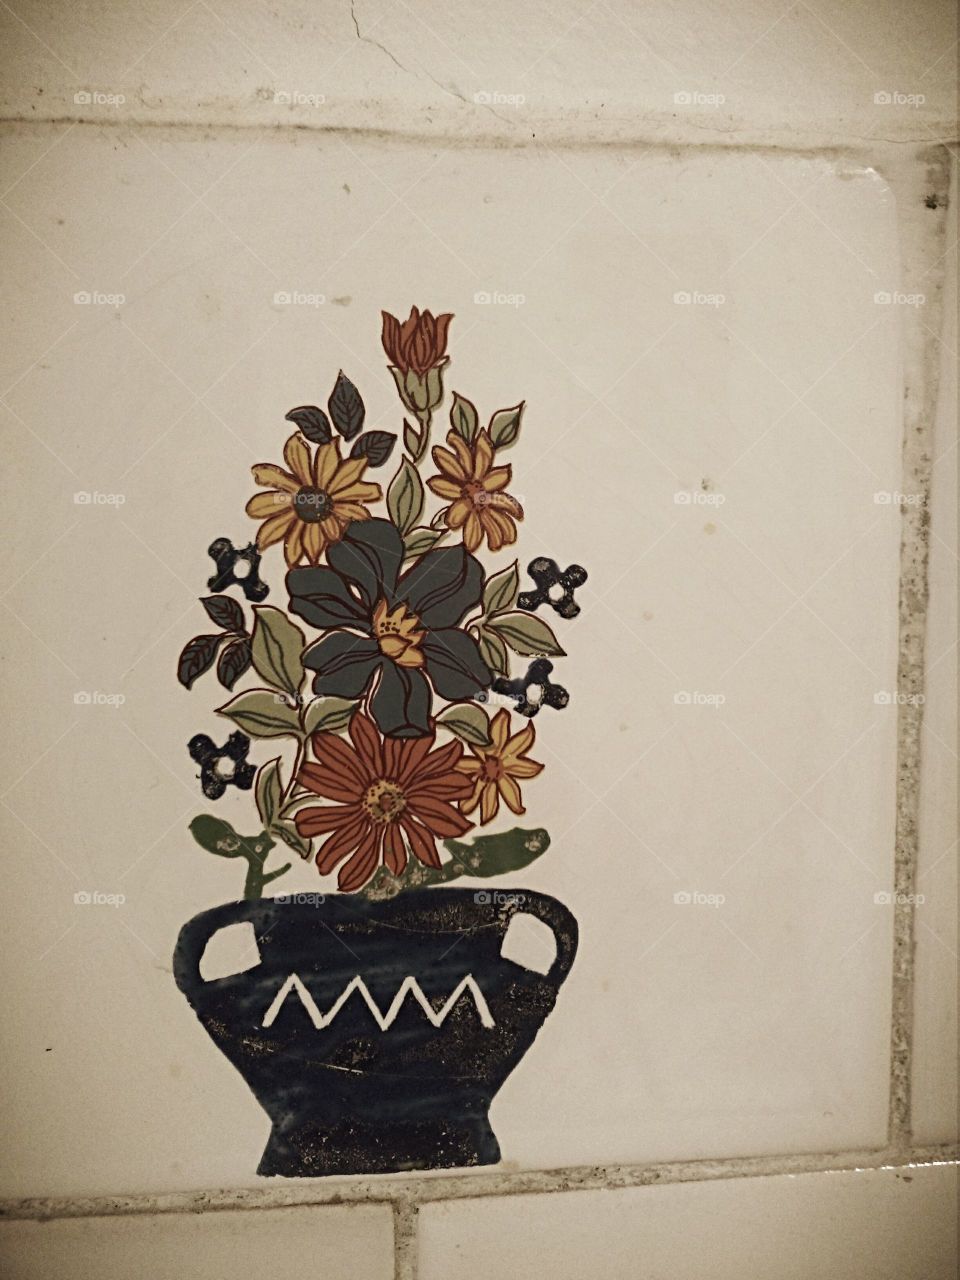 Flowers in a pot on ceramic tiles